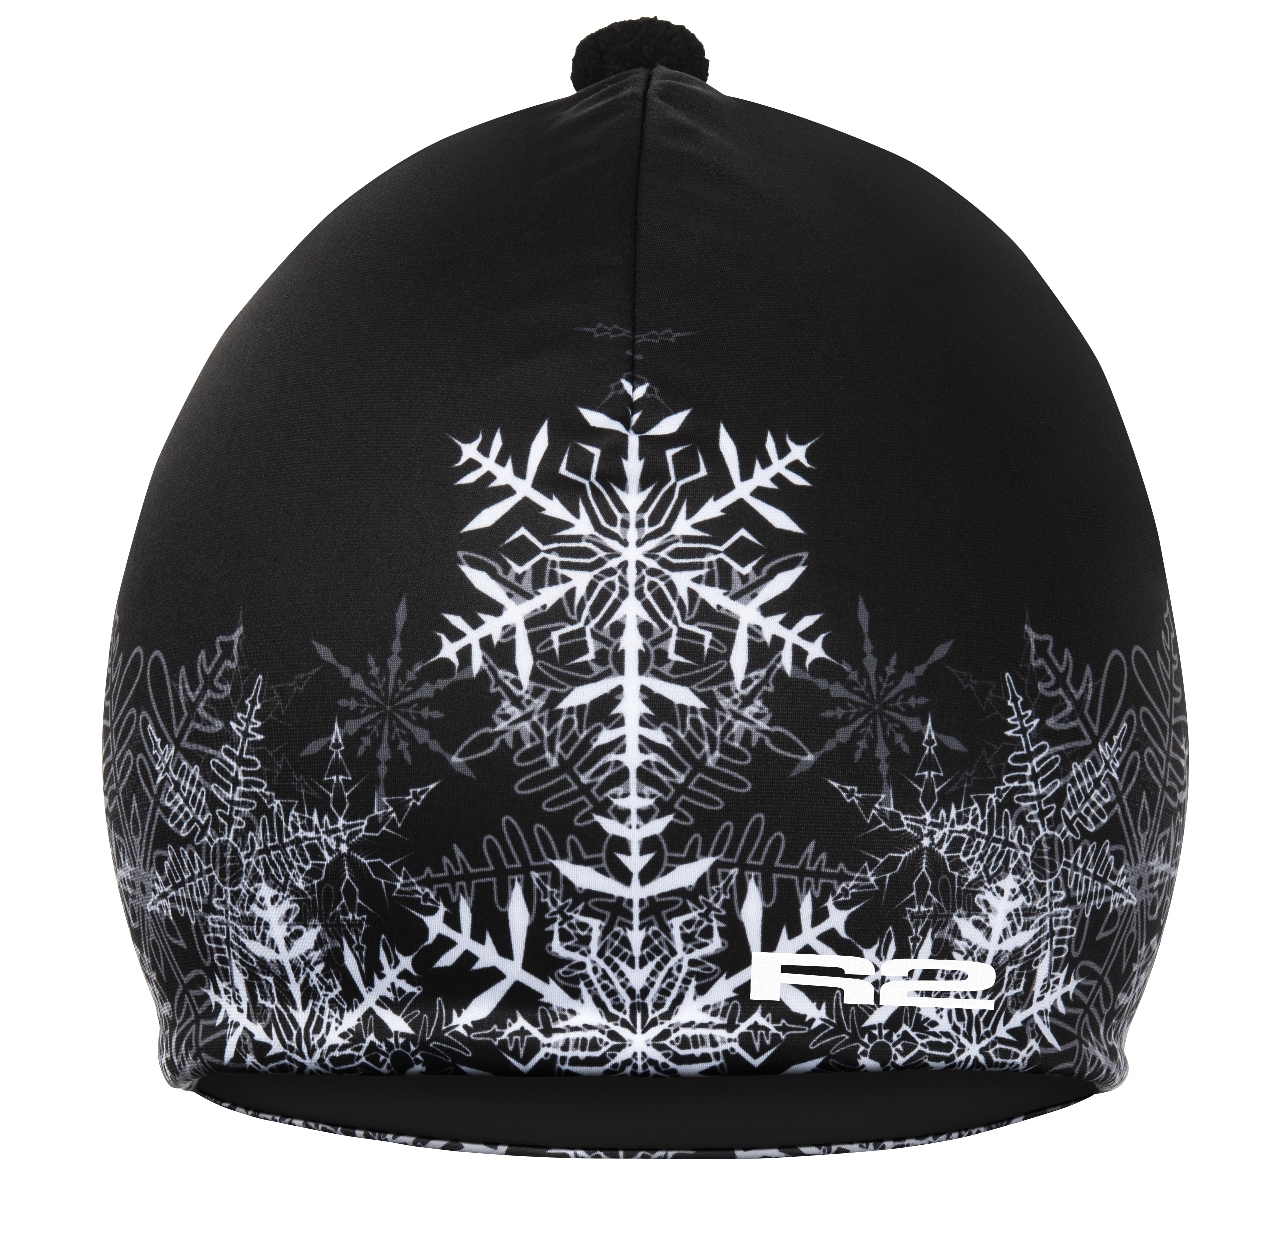 SPORTS FUNCTIONAL HAT R2 ICY ATK10A